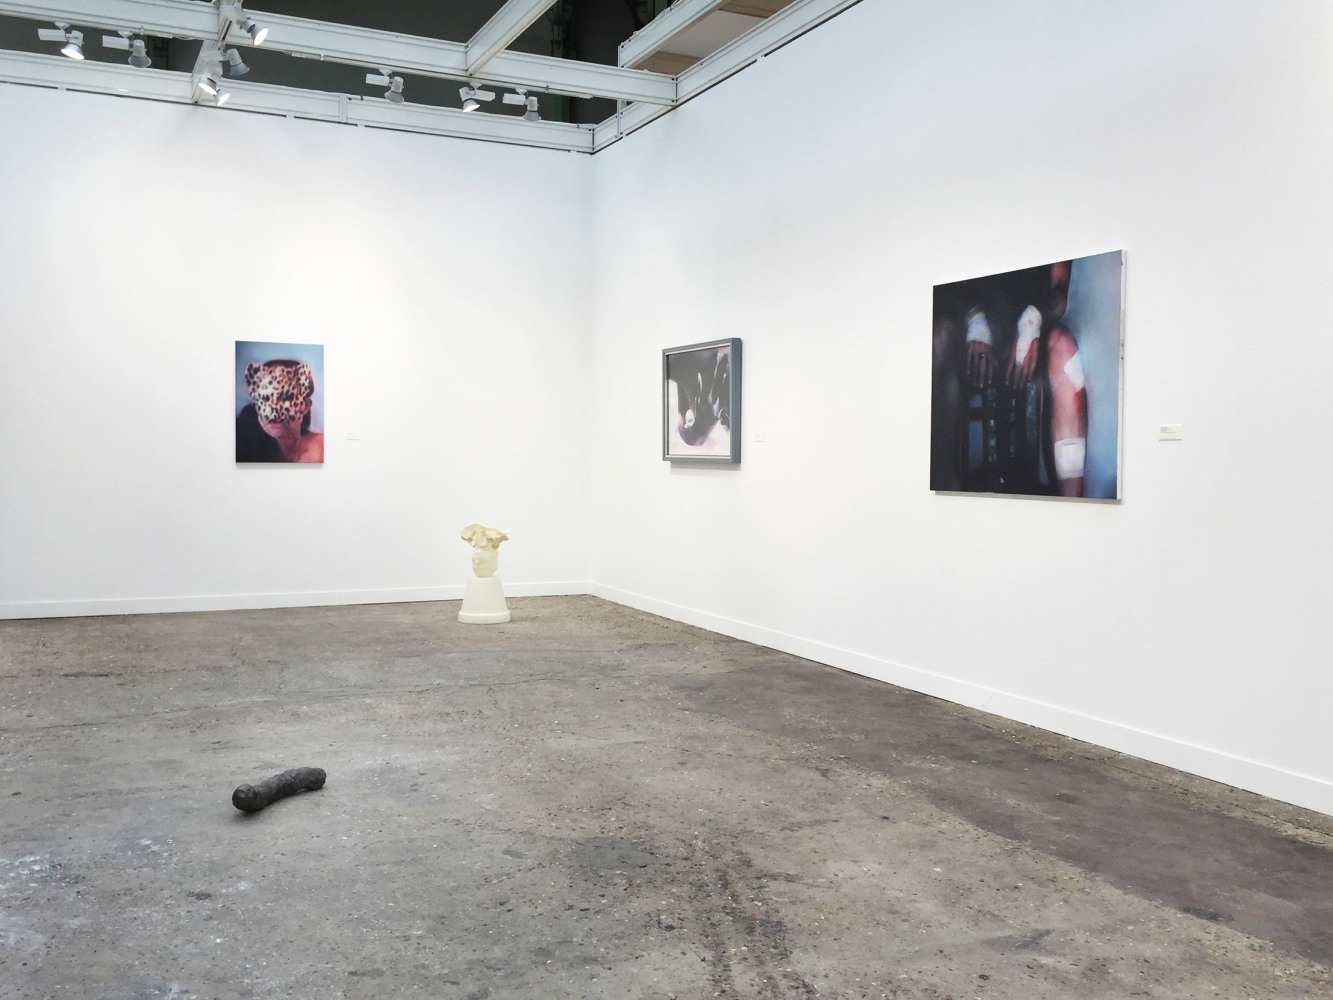 Luhring Augustine&amp;nbsp;

FIAC, Booth B43&amp;nbsp;

Installation view&amp;nbsp;

2015

Pictured: Johannes Kahrs, Janine Antoni, Christopher Wool